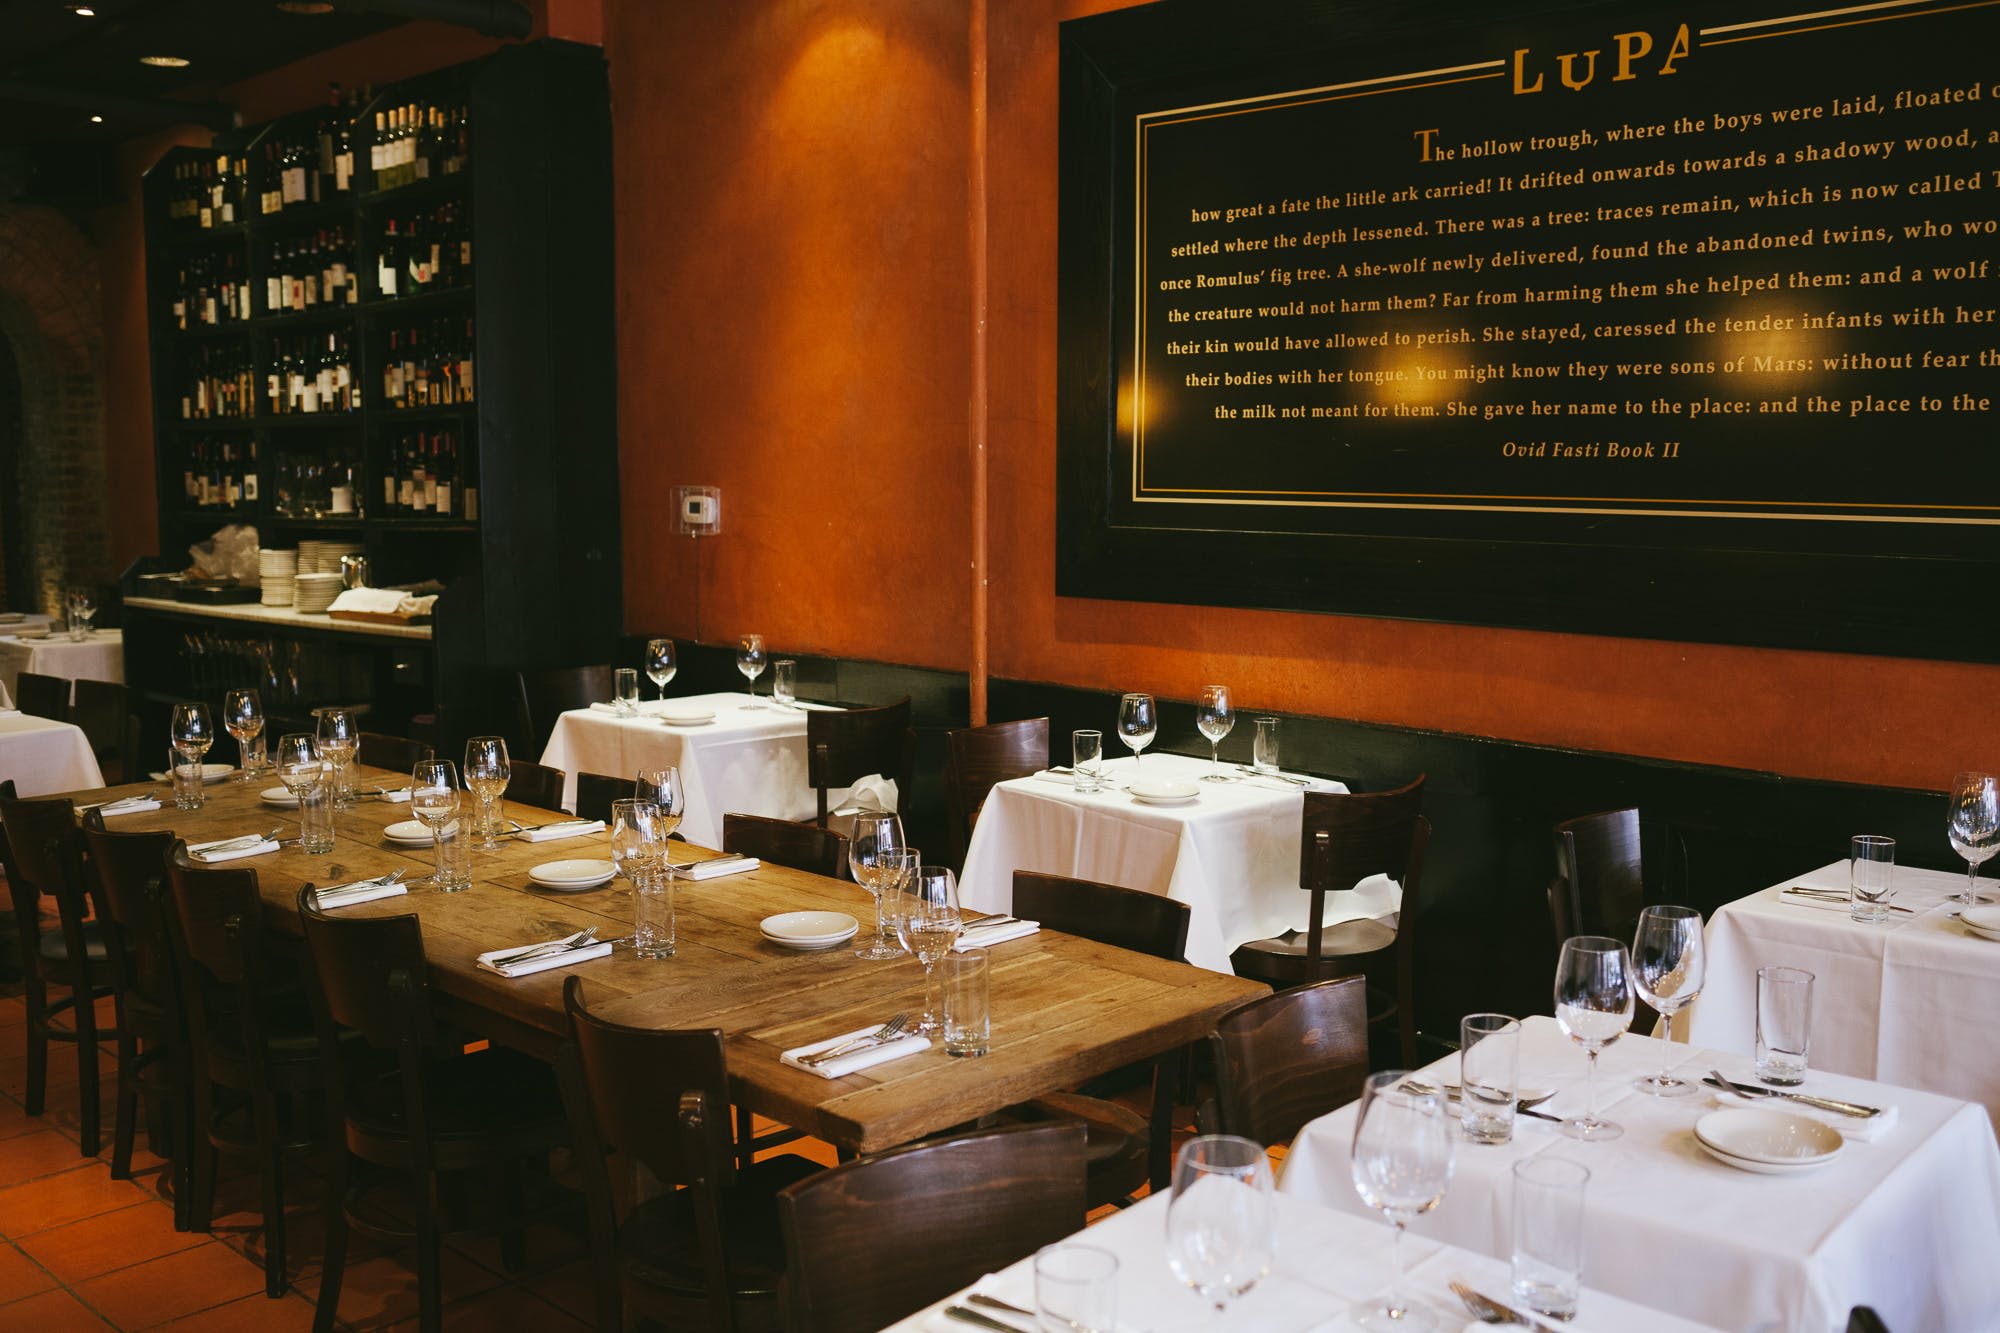 Lupa Review - Greenwich Village - New York - The Infatuation